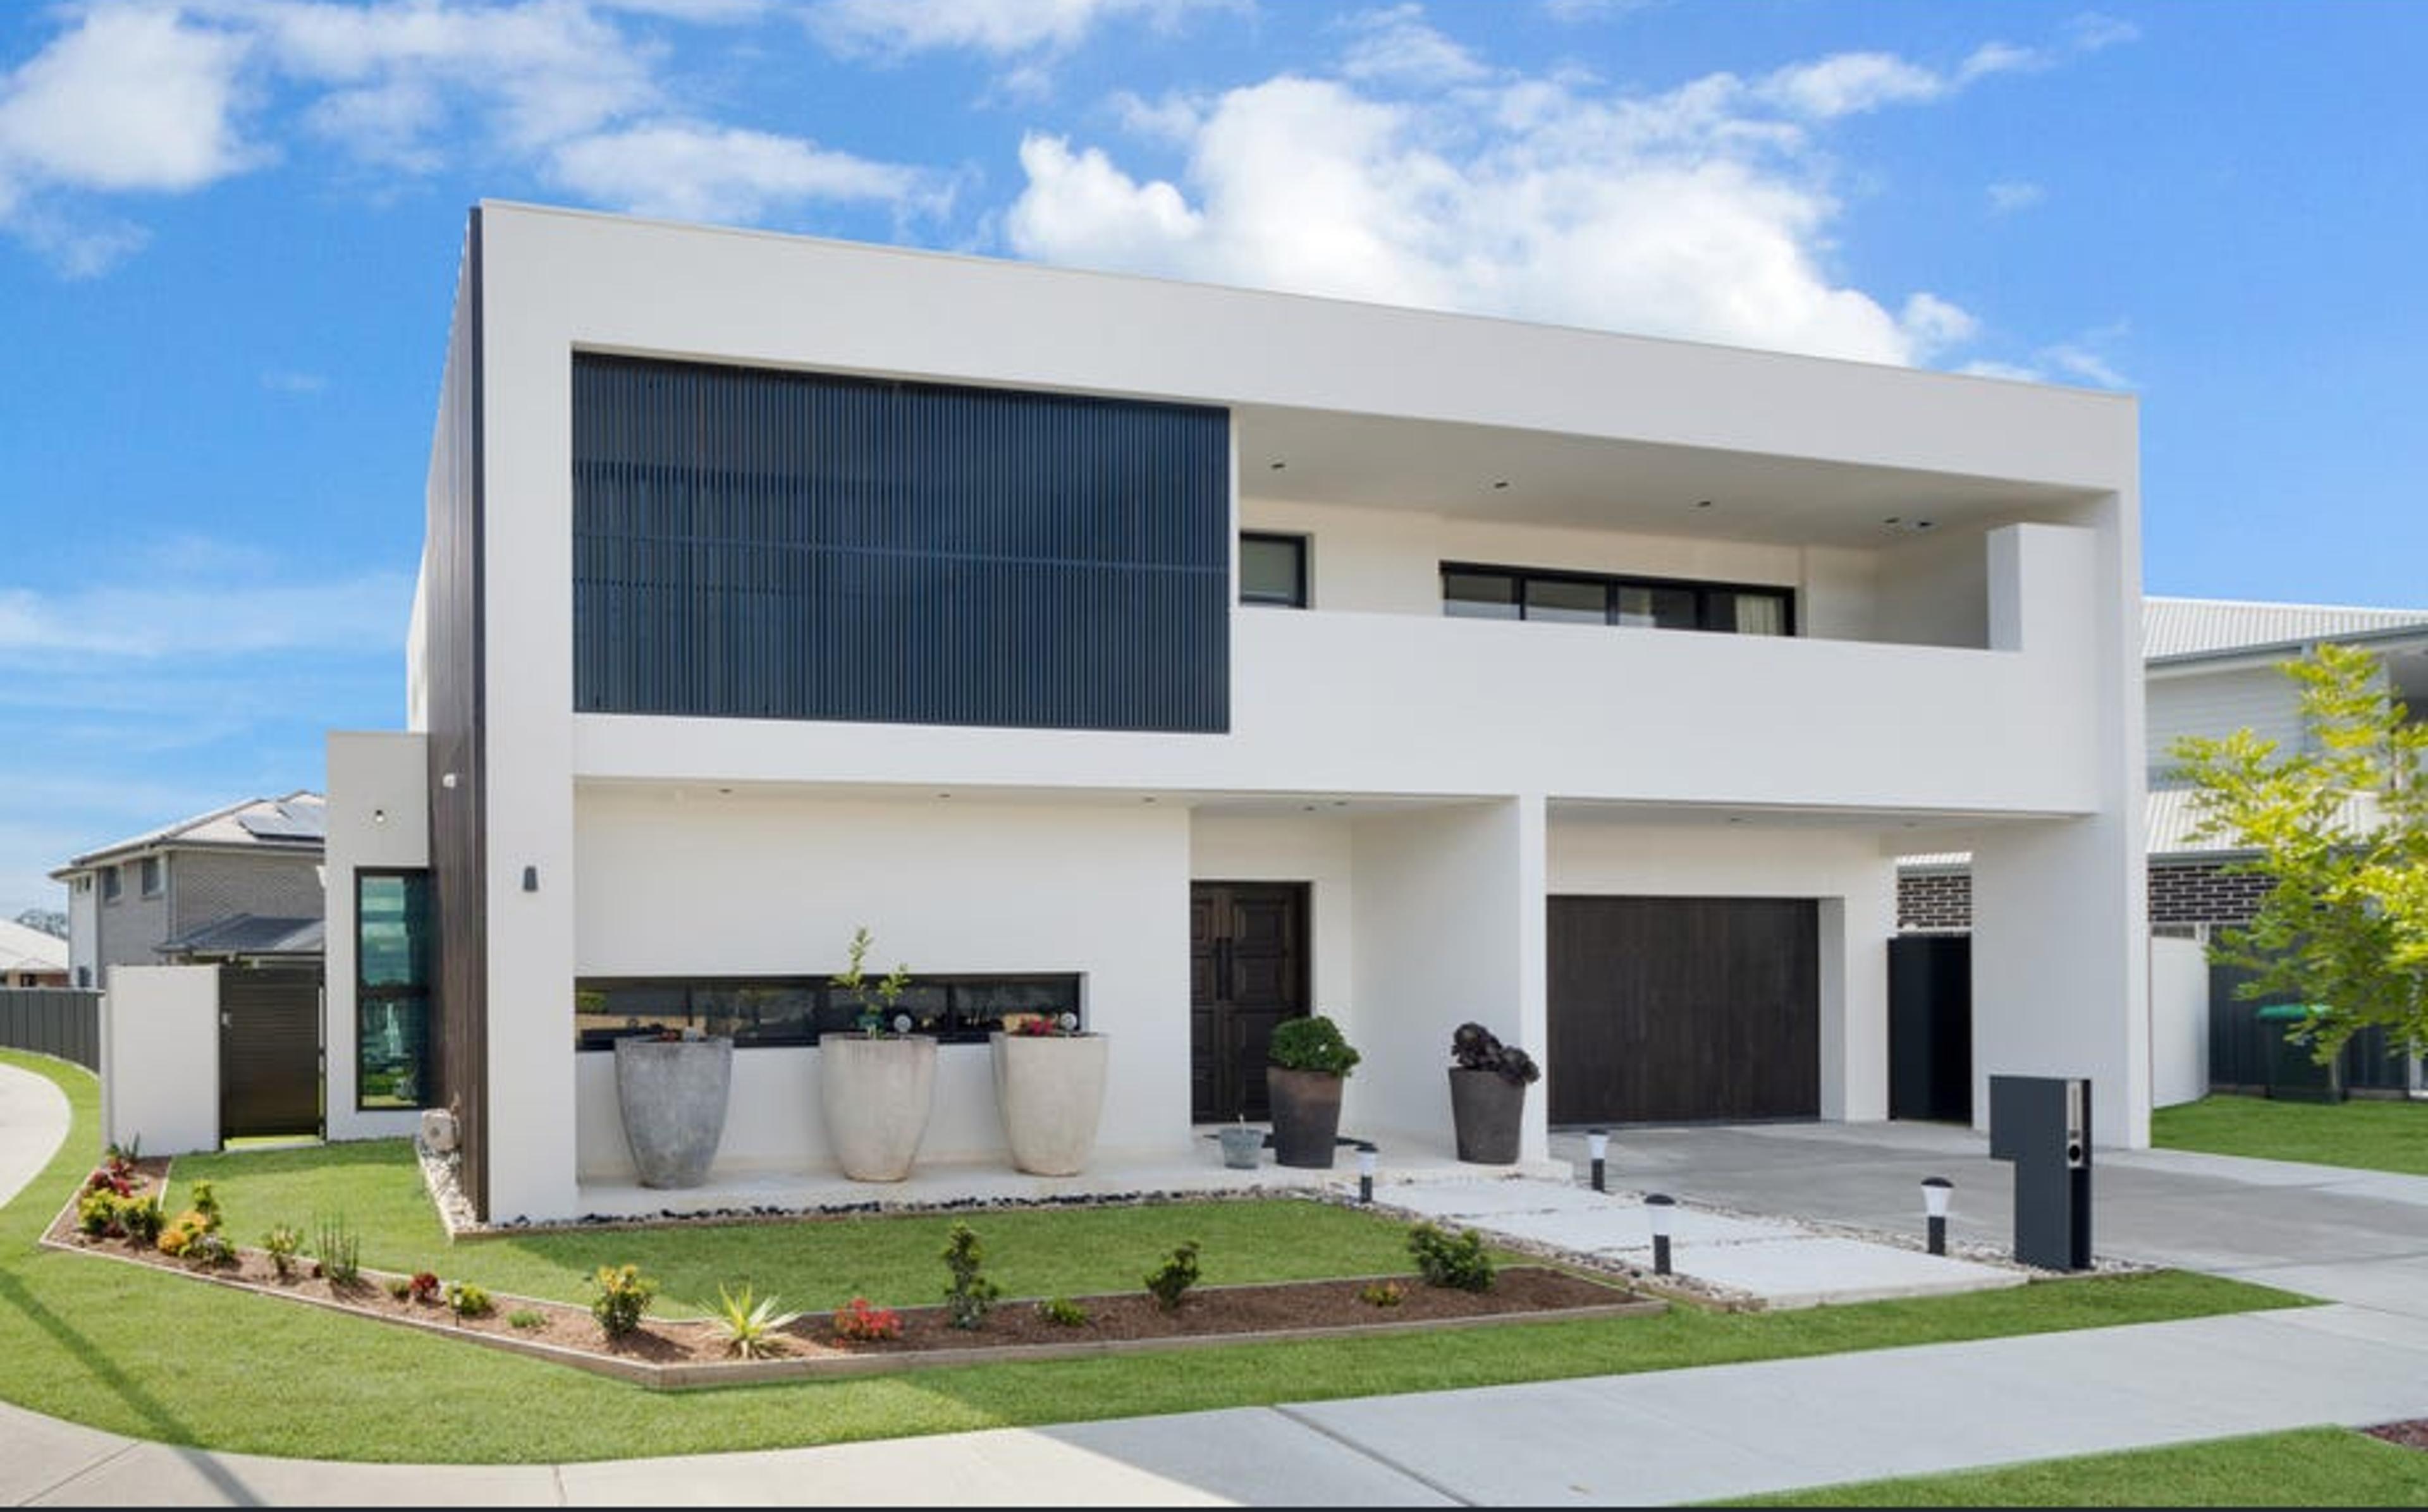 Dezire Homes build, modern facade with monochrome aesthetic